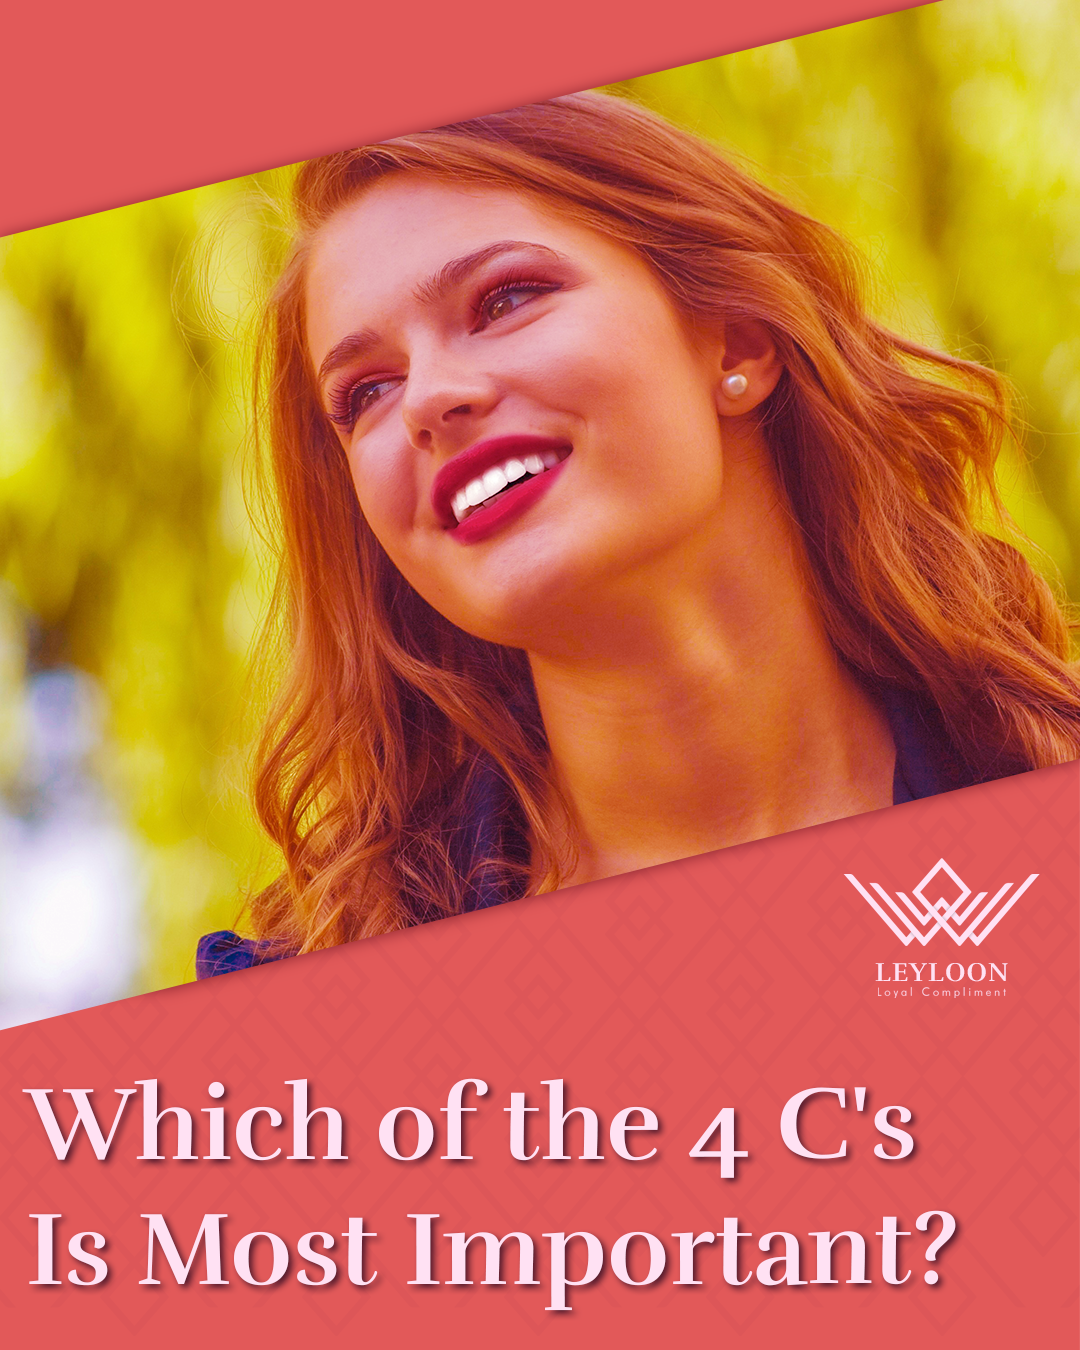 Which of the 4 C's Is Most Important?